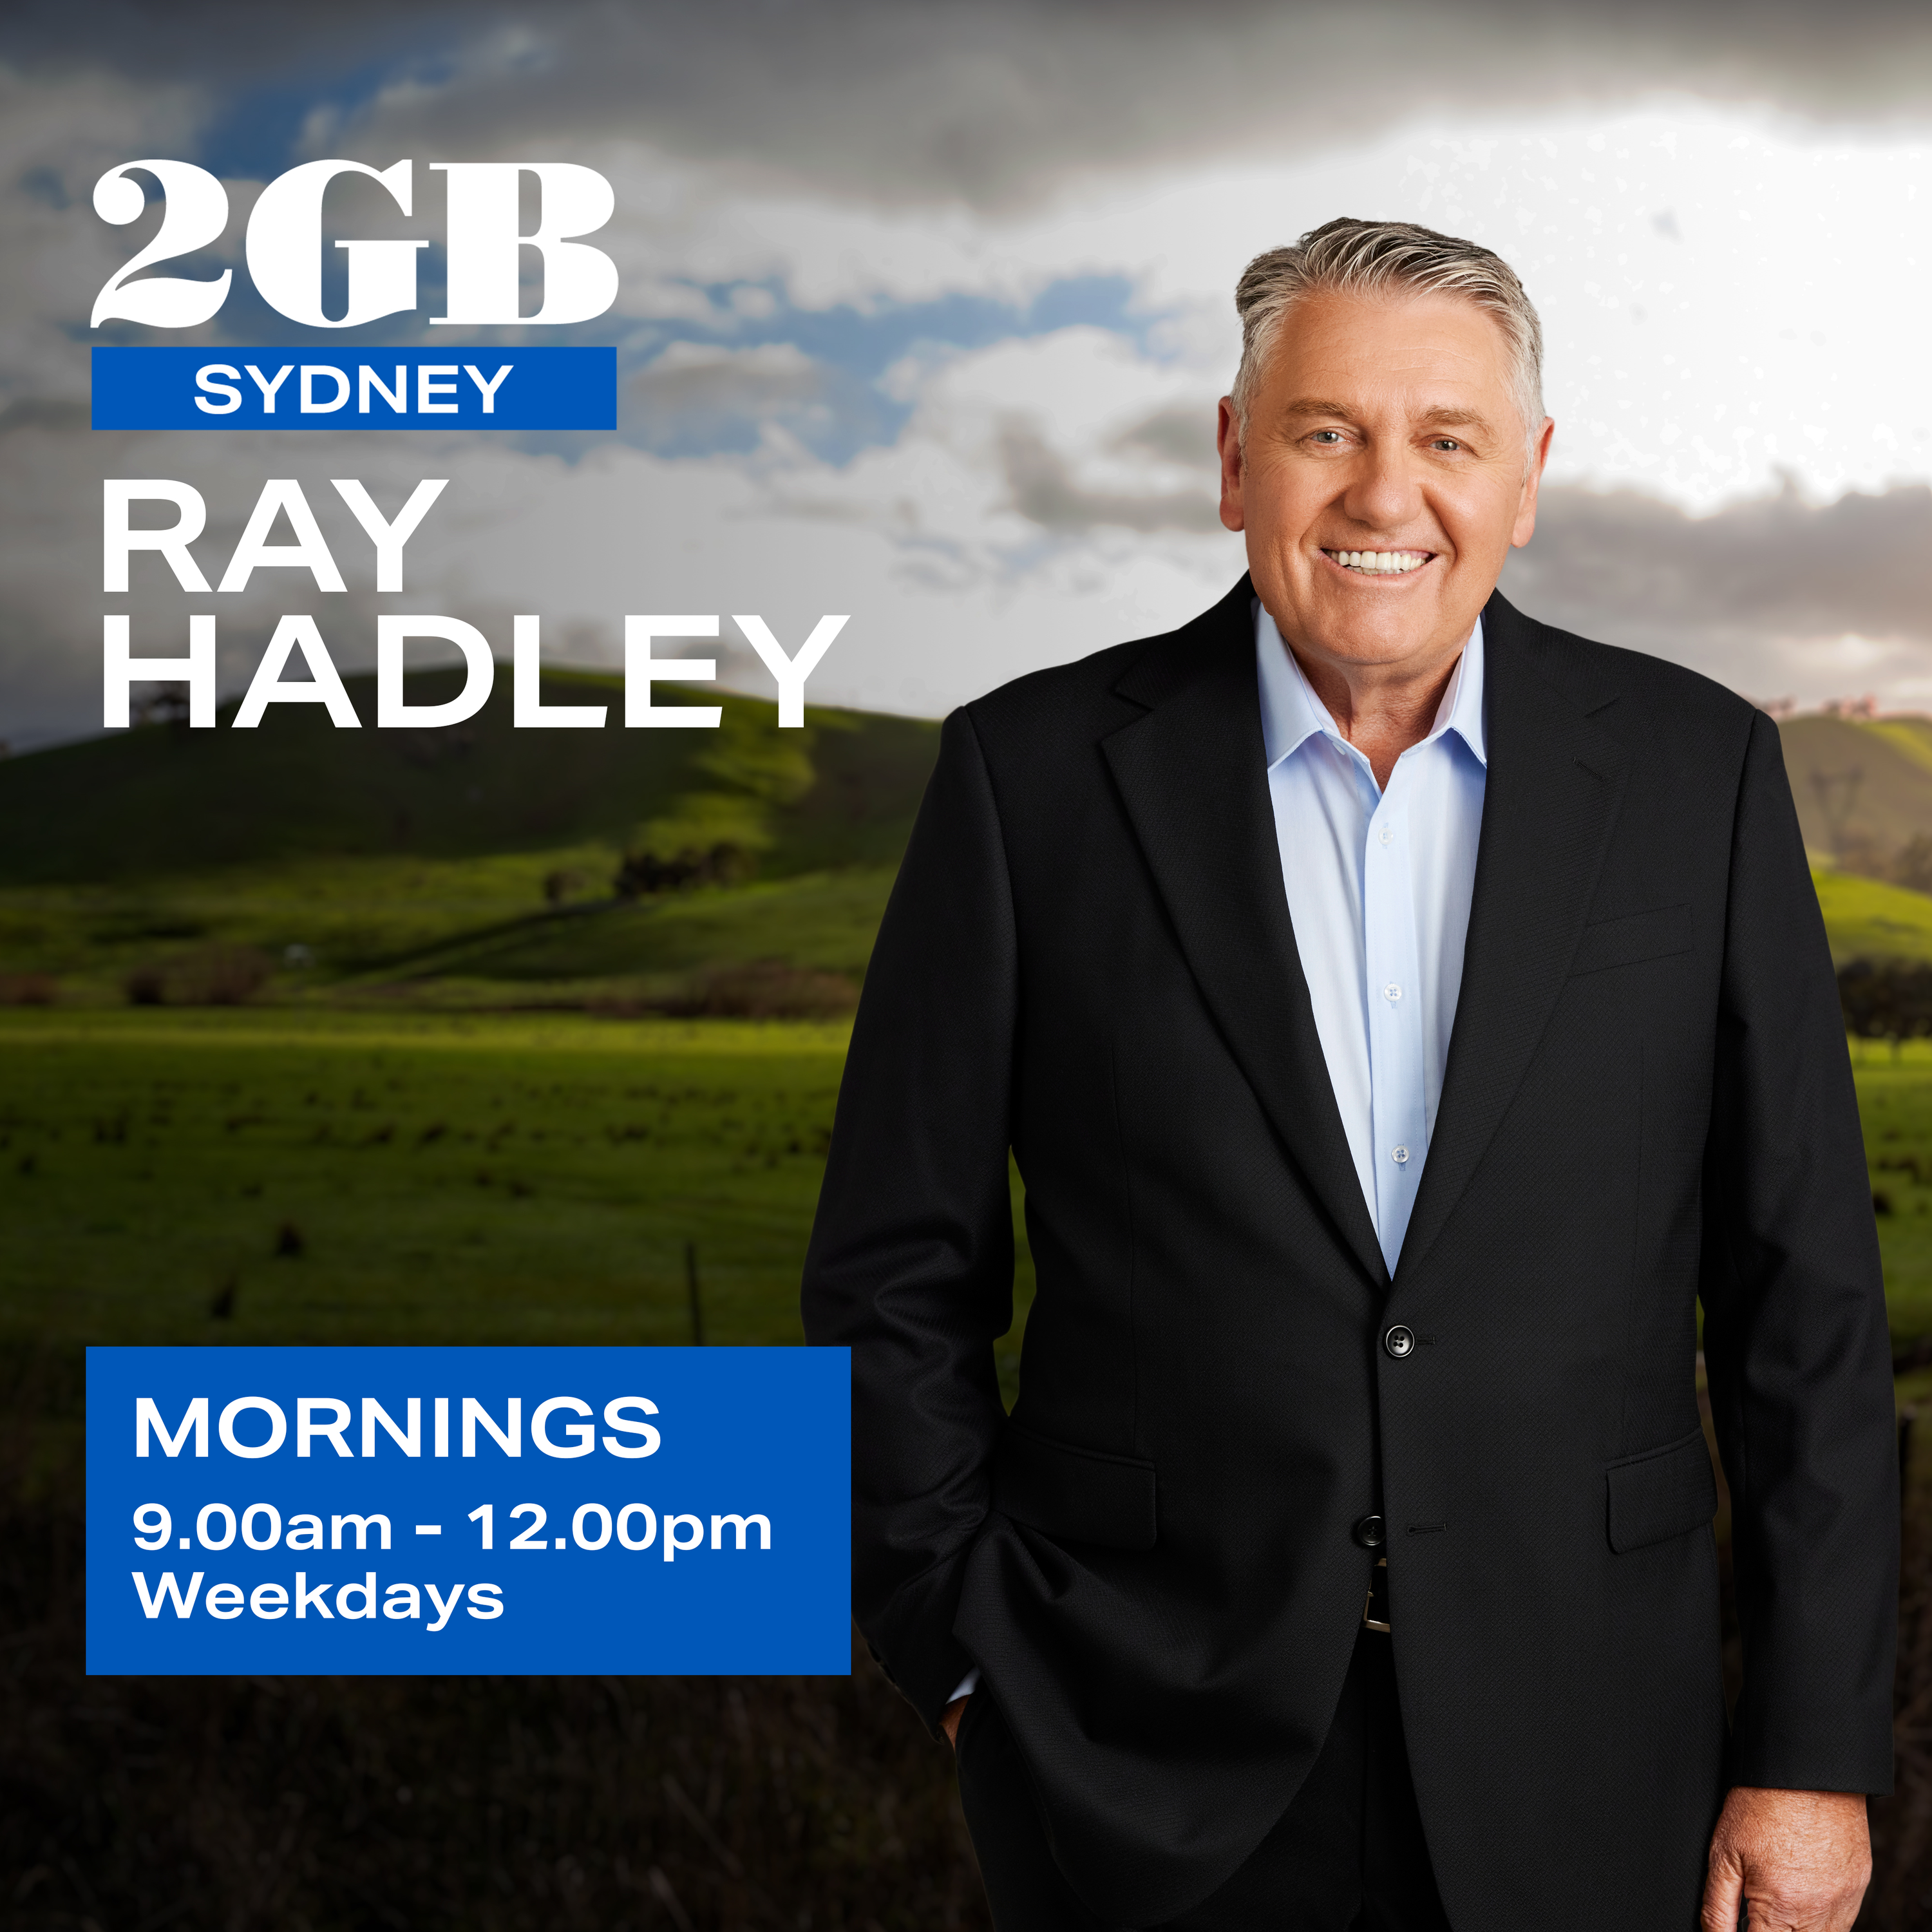 The Ray Hadley Morning Show with Mark Levy - Full Show, December 15th